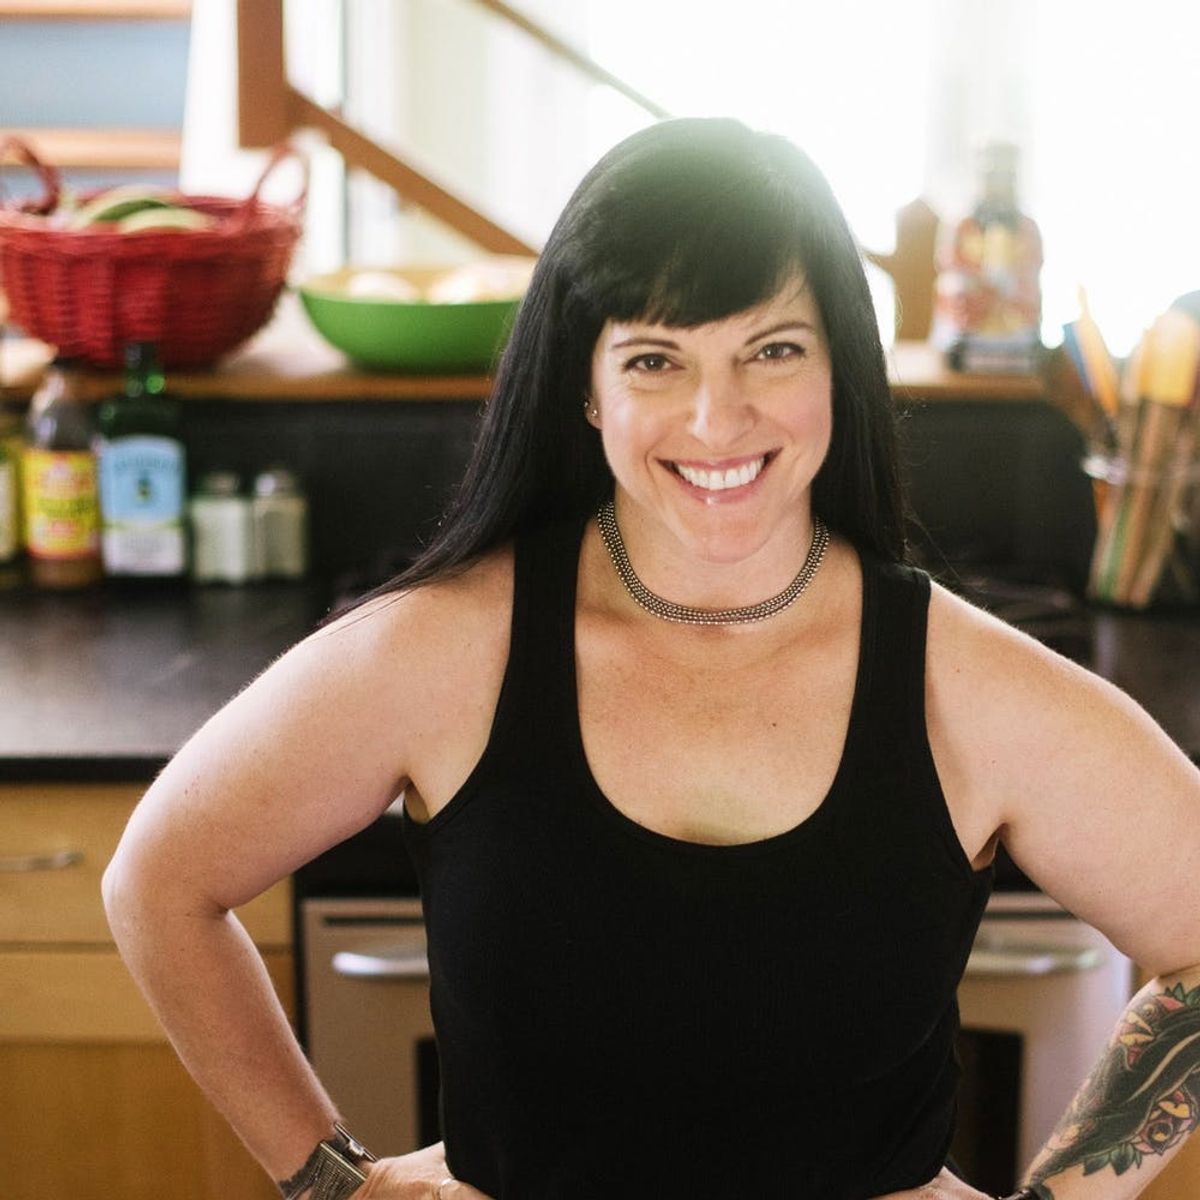 Paleo Expert Melissa Joulwan Shares Her Tips for Cooking Clean in 2017